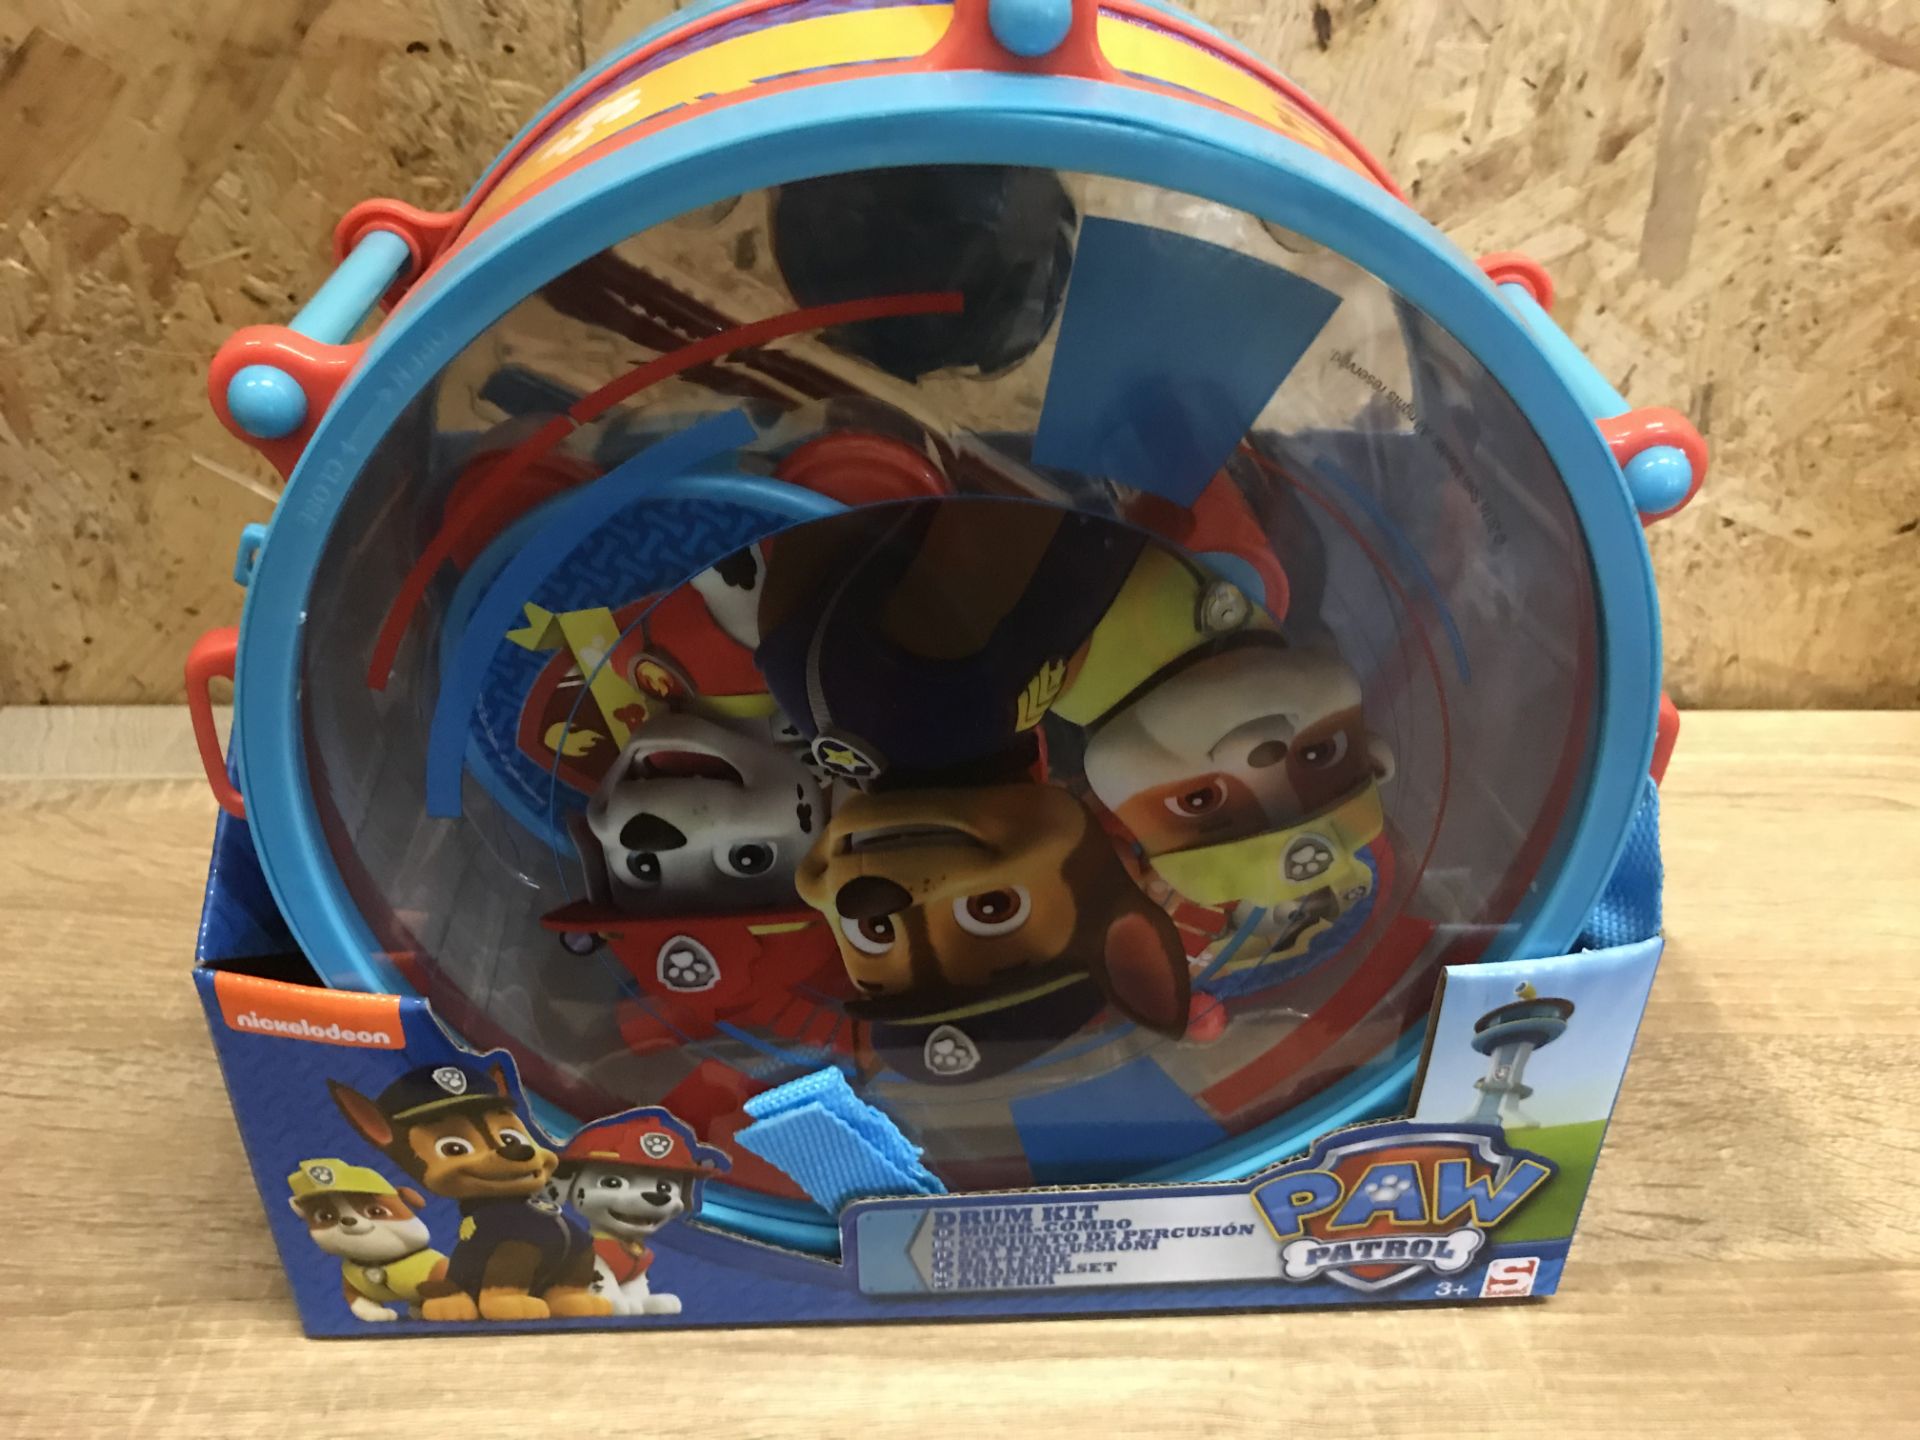 6 X BRAND NEW BOXED PAW PATROL DRUM KITS - INCLUDES DRUM & STICKS, FLUTE, CASTANETS, TAMBOURINE,